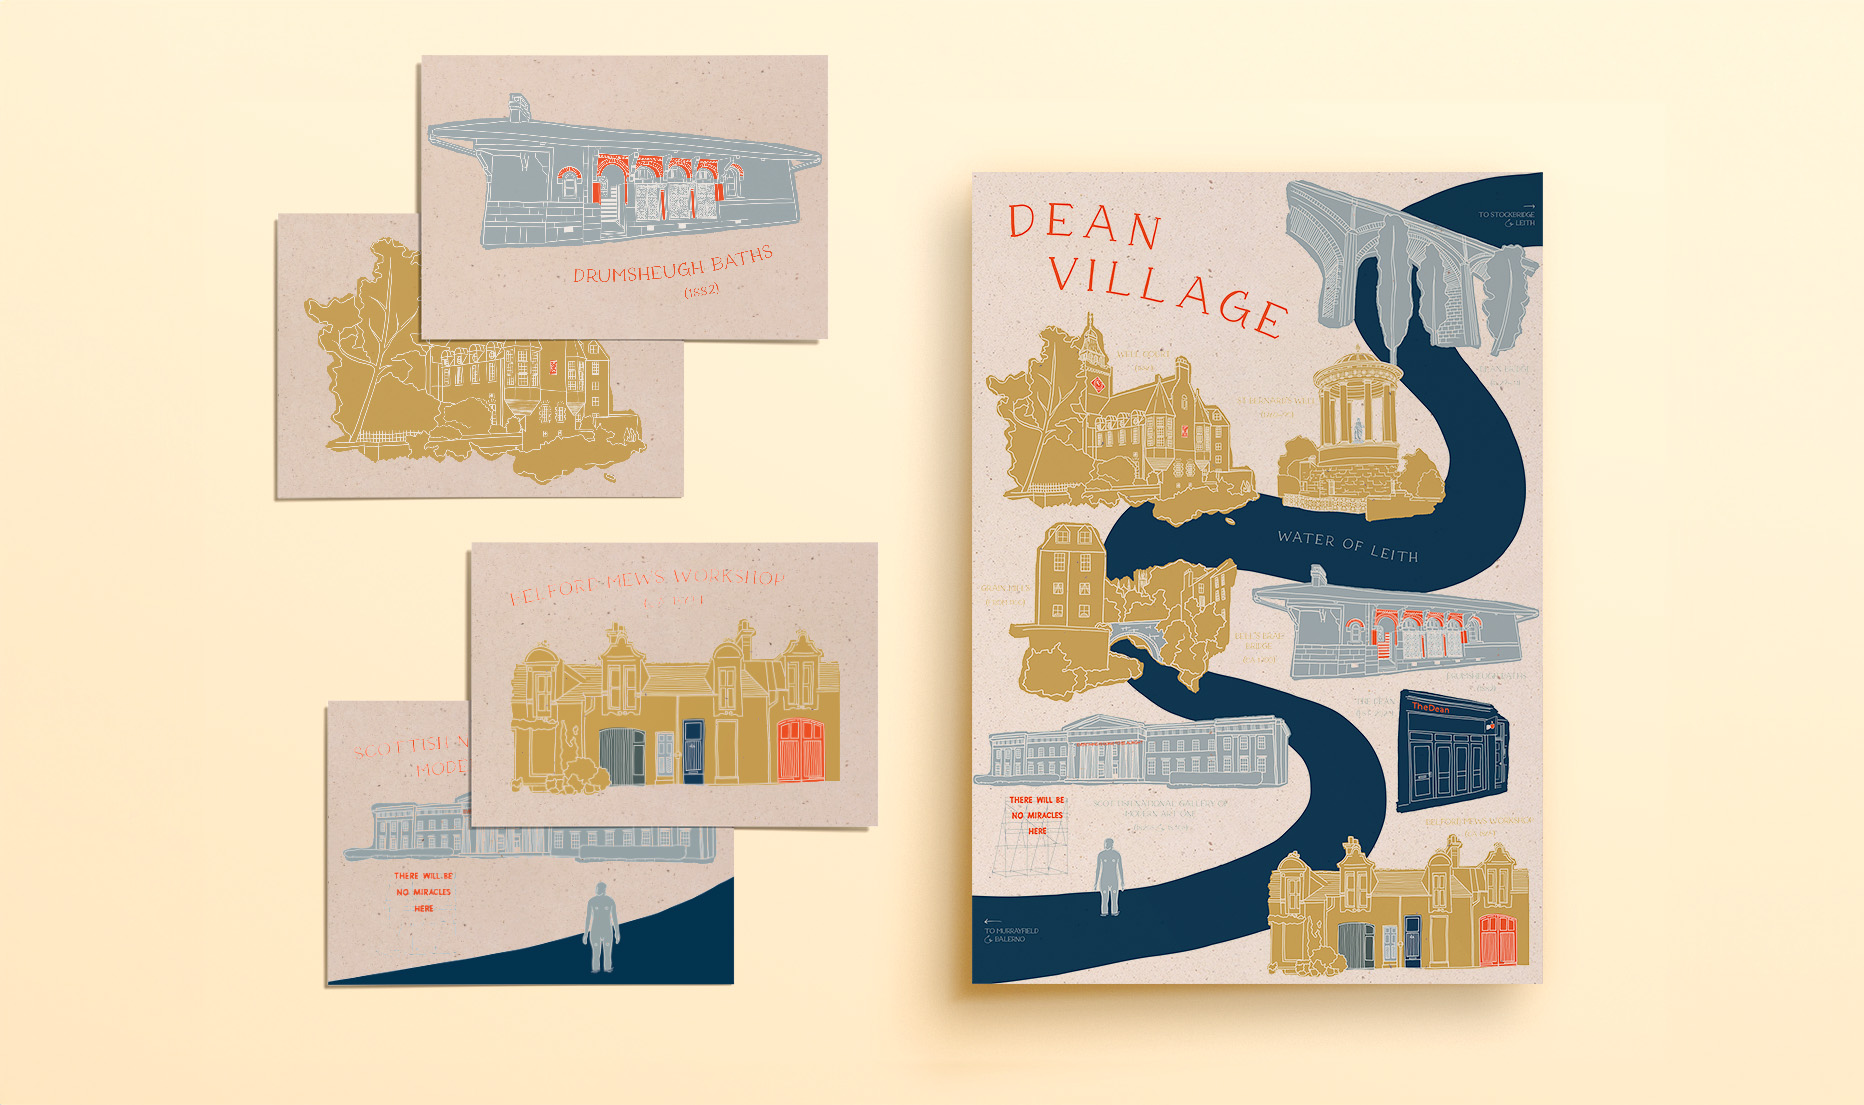 Dean Village illustrated poster and cards